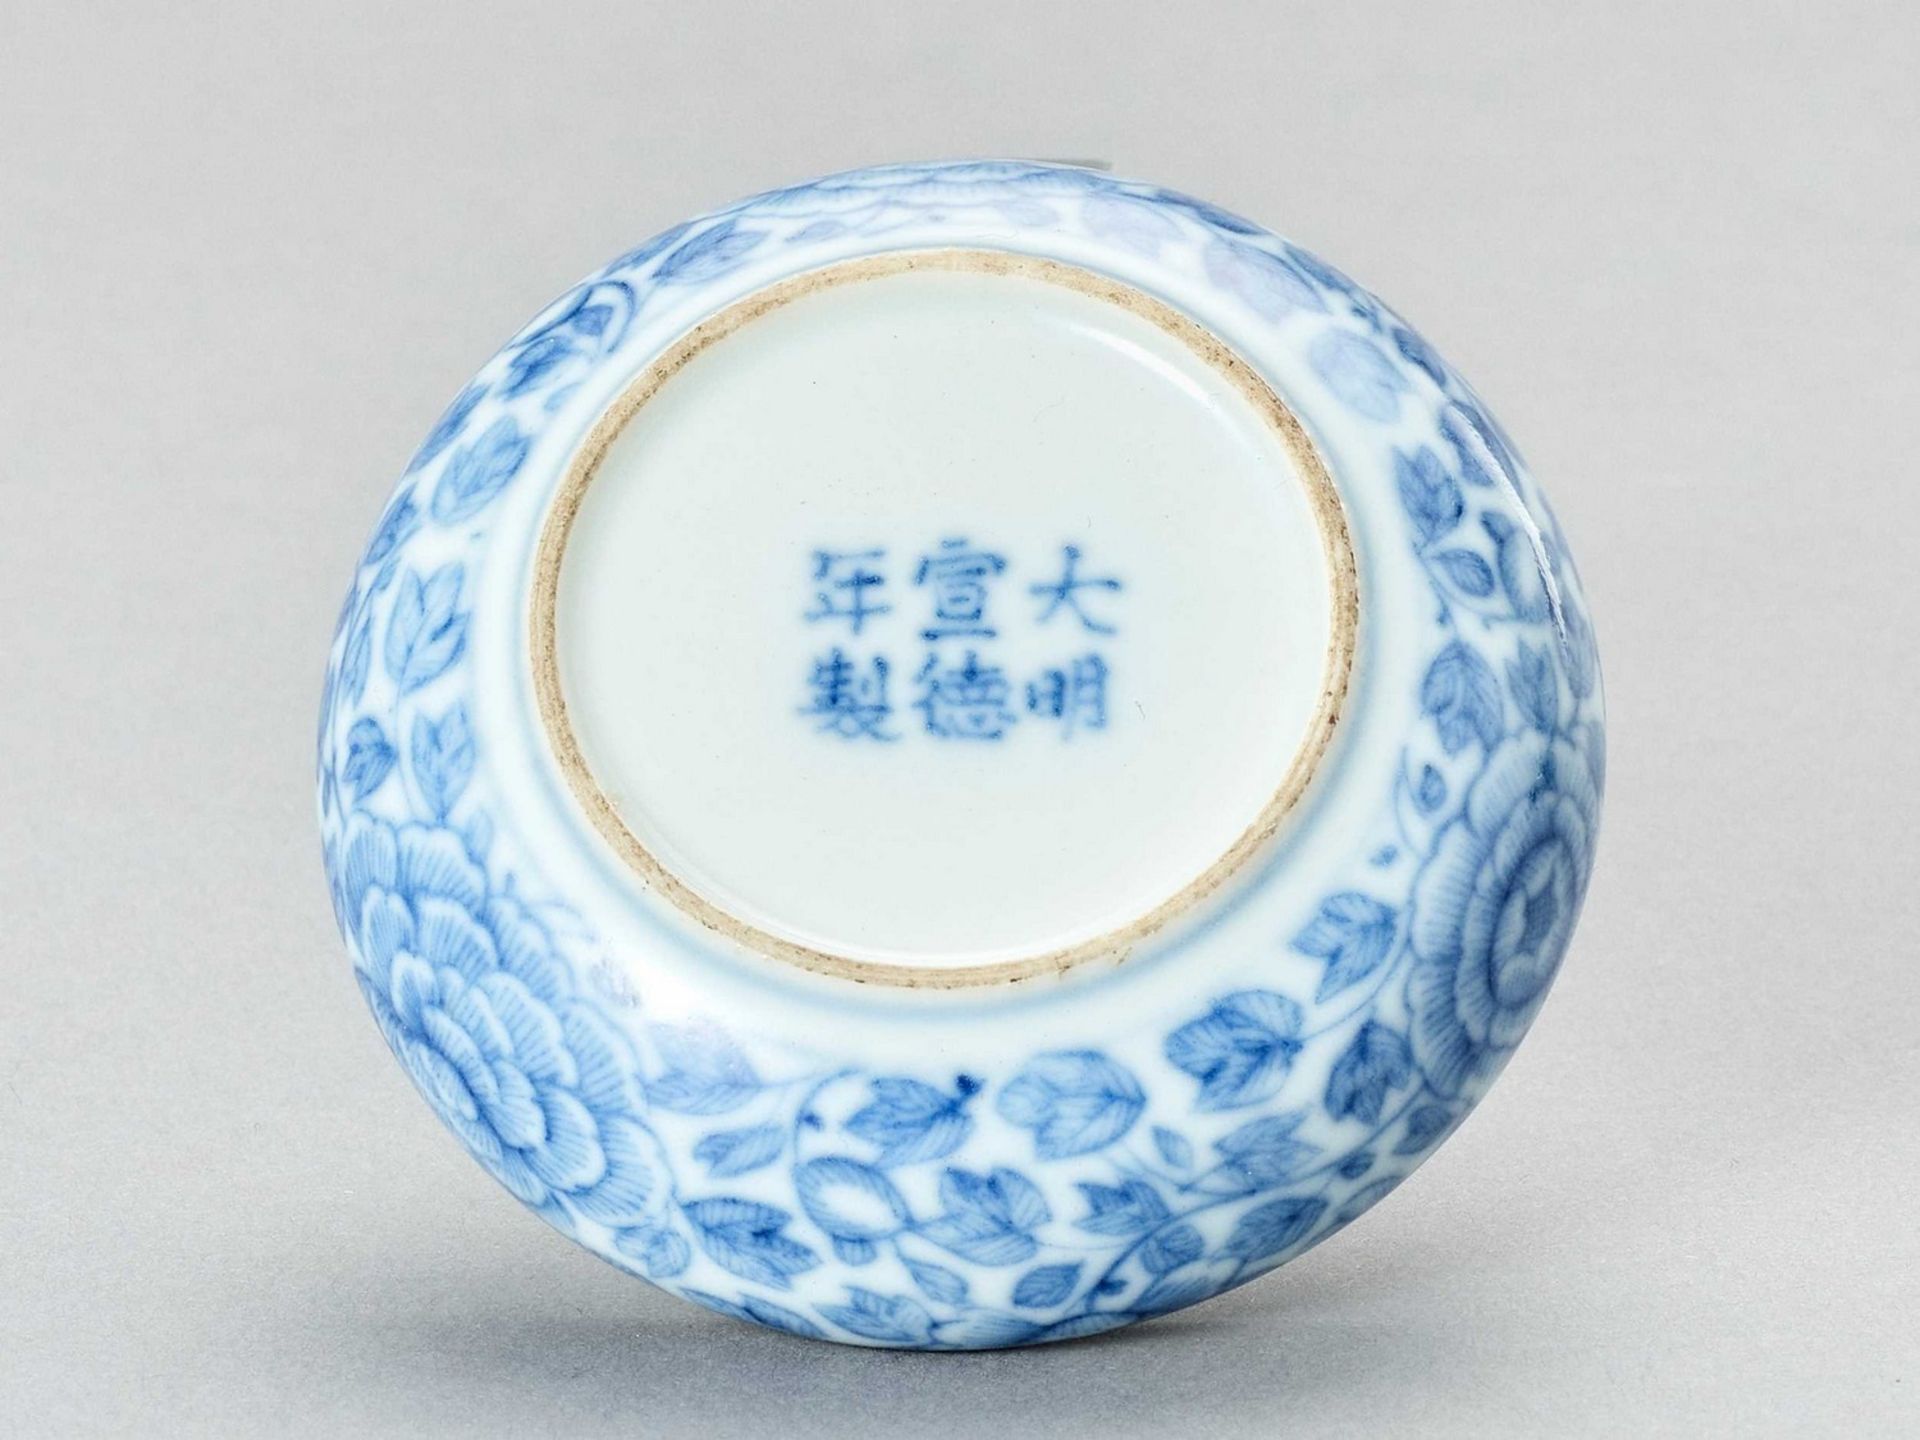 A BLUE AND WHITE PORCELAIN SEAL PASTE BOX AND COVER, LATE QING TO REPUBLIC - Image 5 of 6